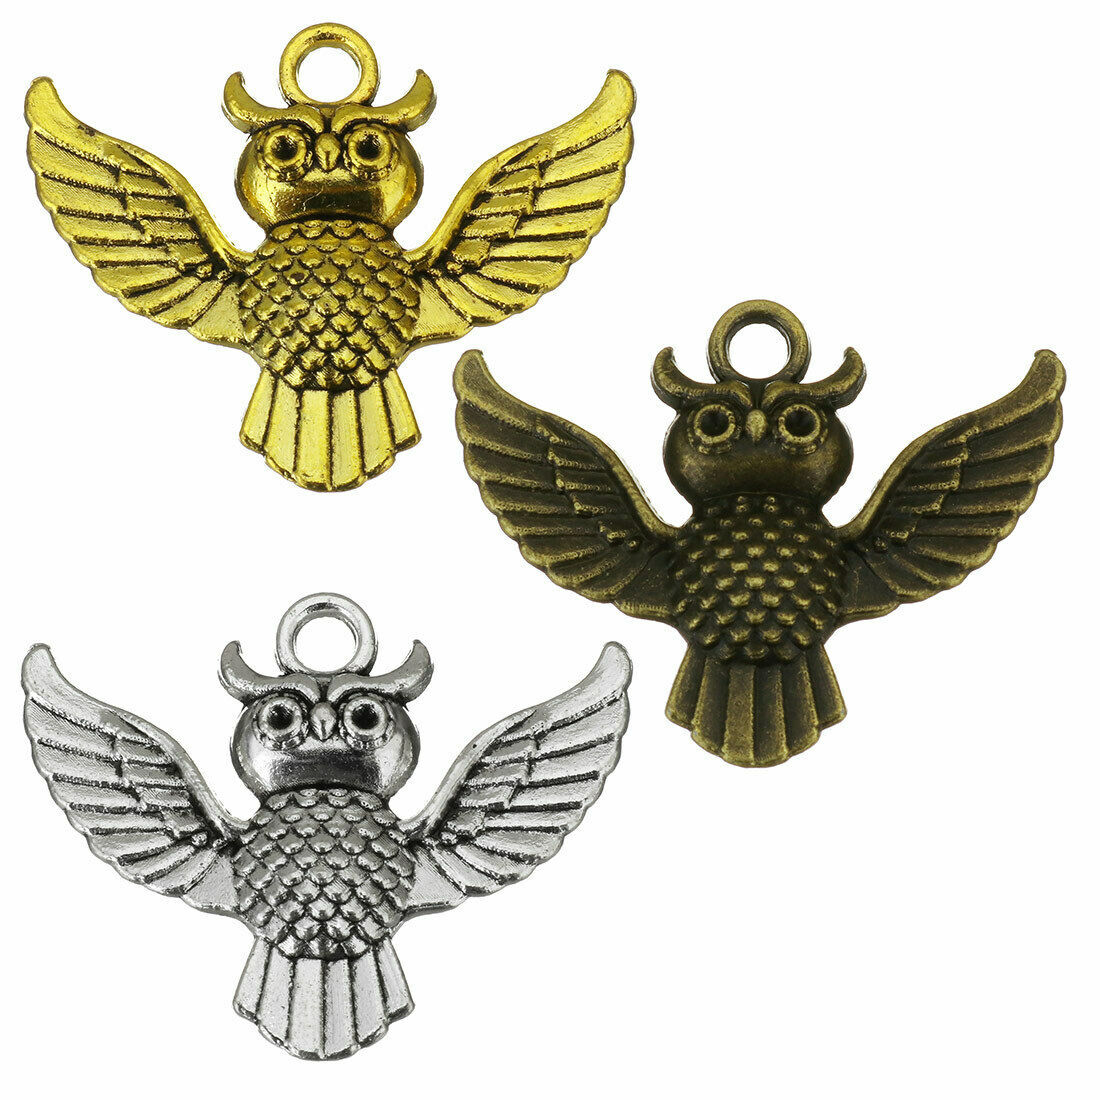 Primary image for 3 Flying Owl Charms Antiqued Silver Bronze Gold Mixed Set Bird Jewelry Supplies 